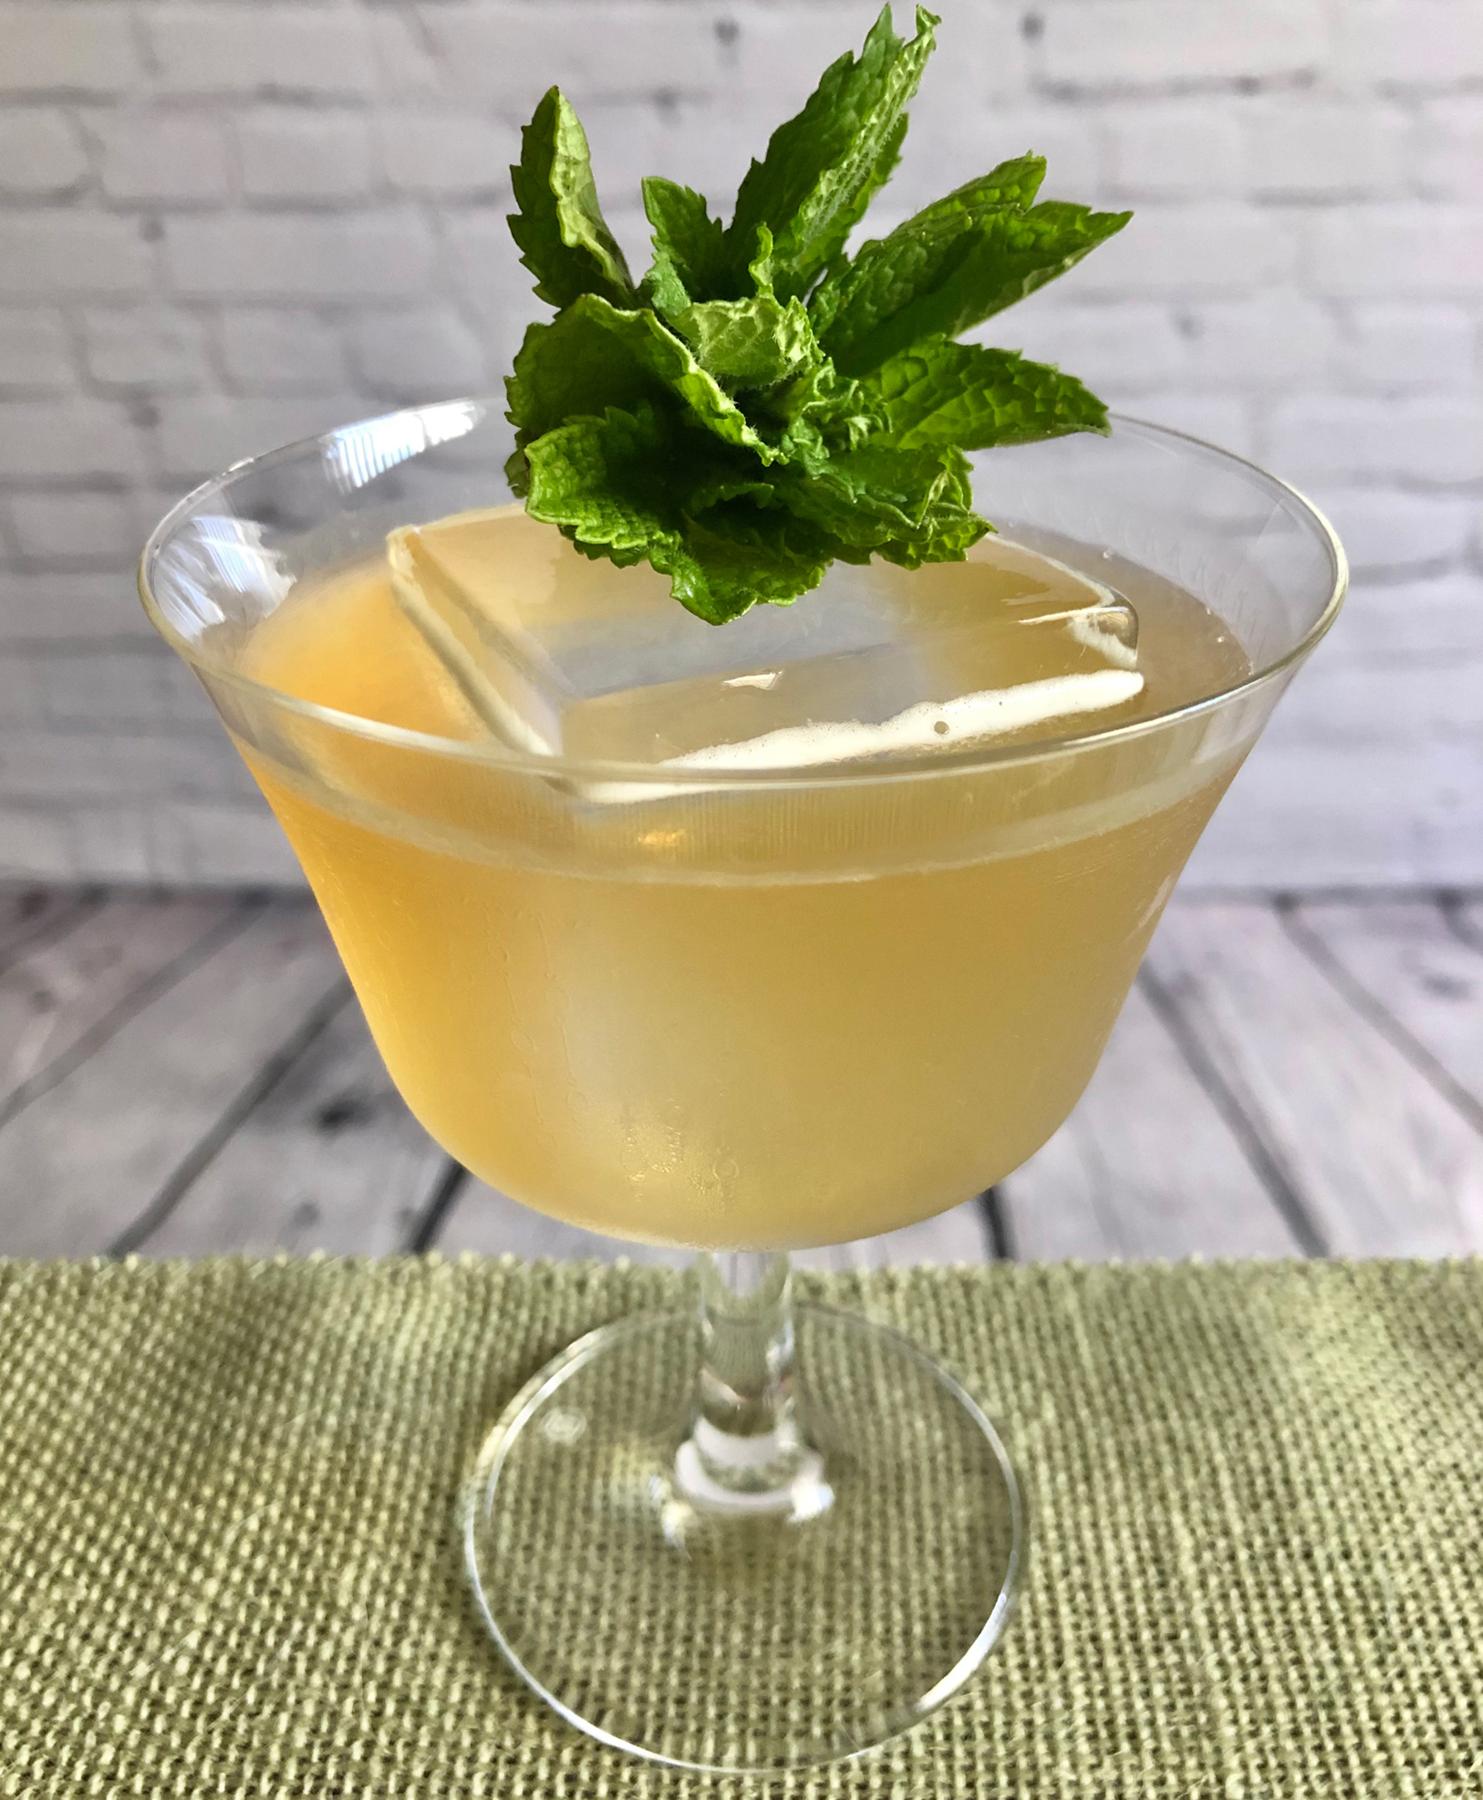 An example of the The Derby Cocktail, the mixed drink (drink) featuring bourbon whiskey, Dolin Rouge Vermouth de Chambéry, Pierre Ferrand Dry Curaçao, lime juice, and sprig of mint; photo by Lee Edwards